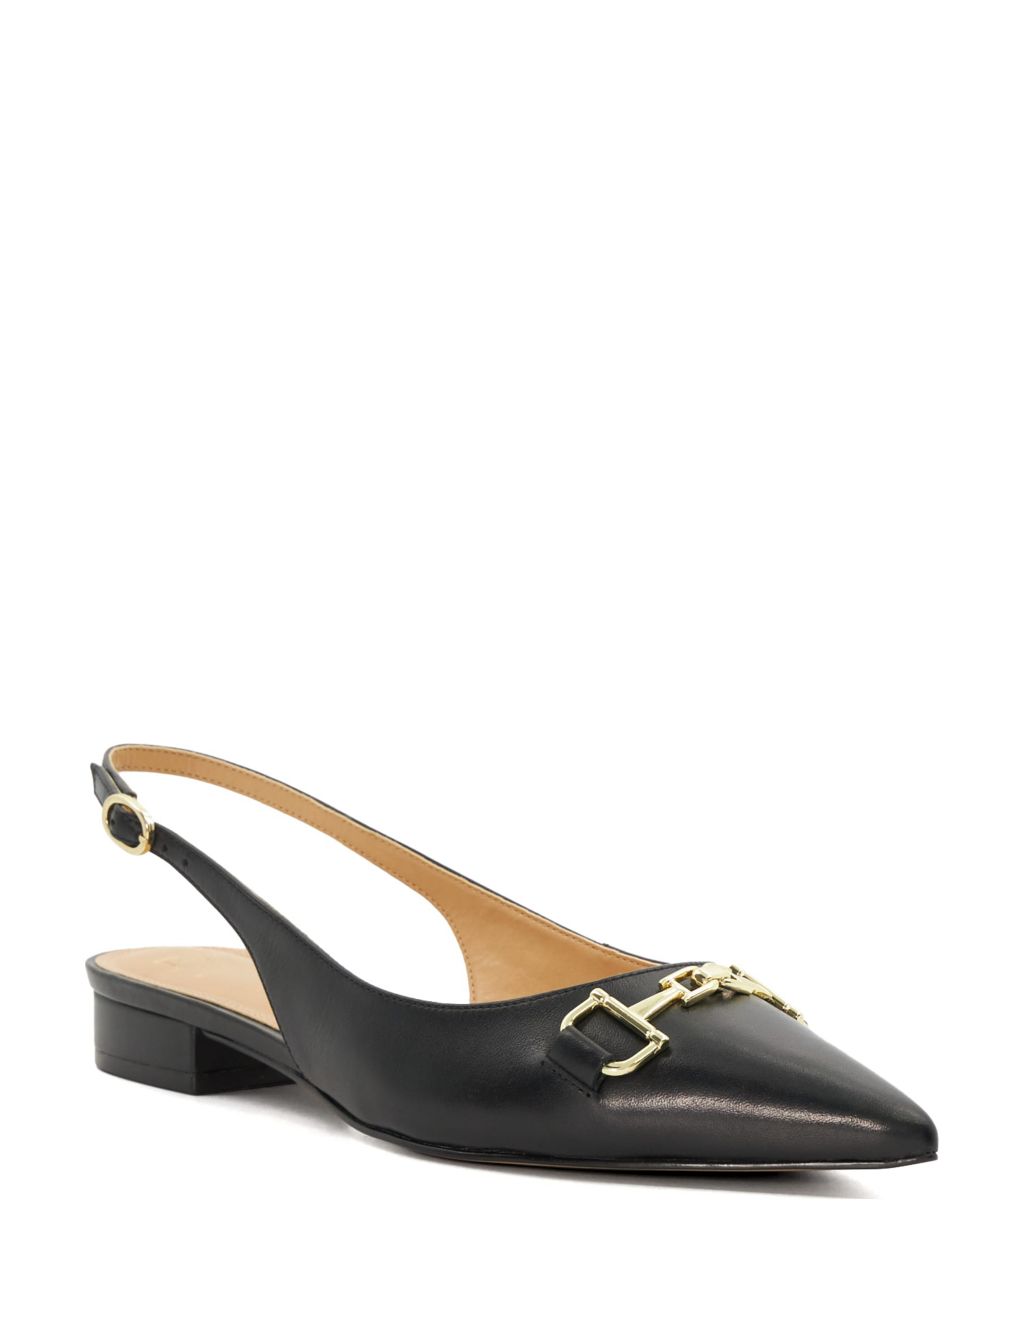 Leather Buckle Flat Pointed Ballet Pumps 1 of 5